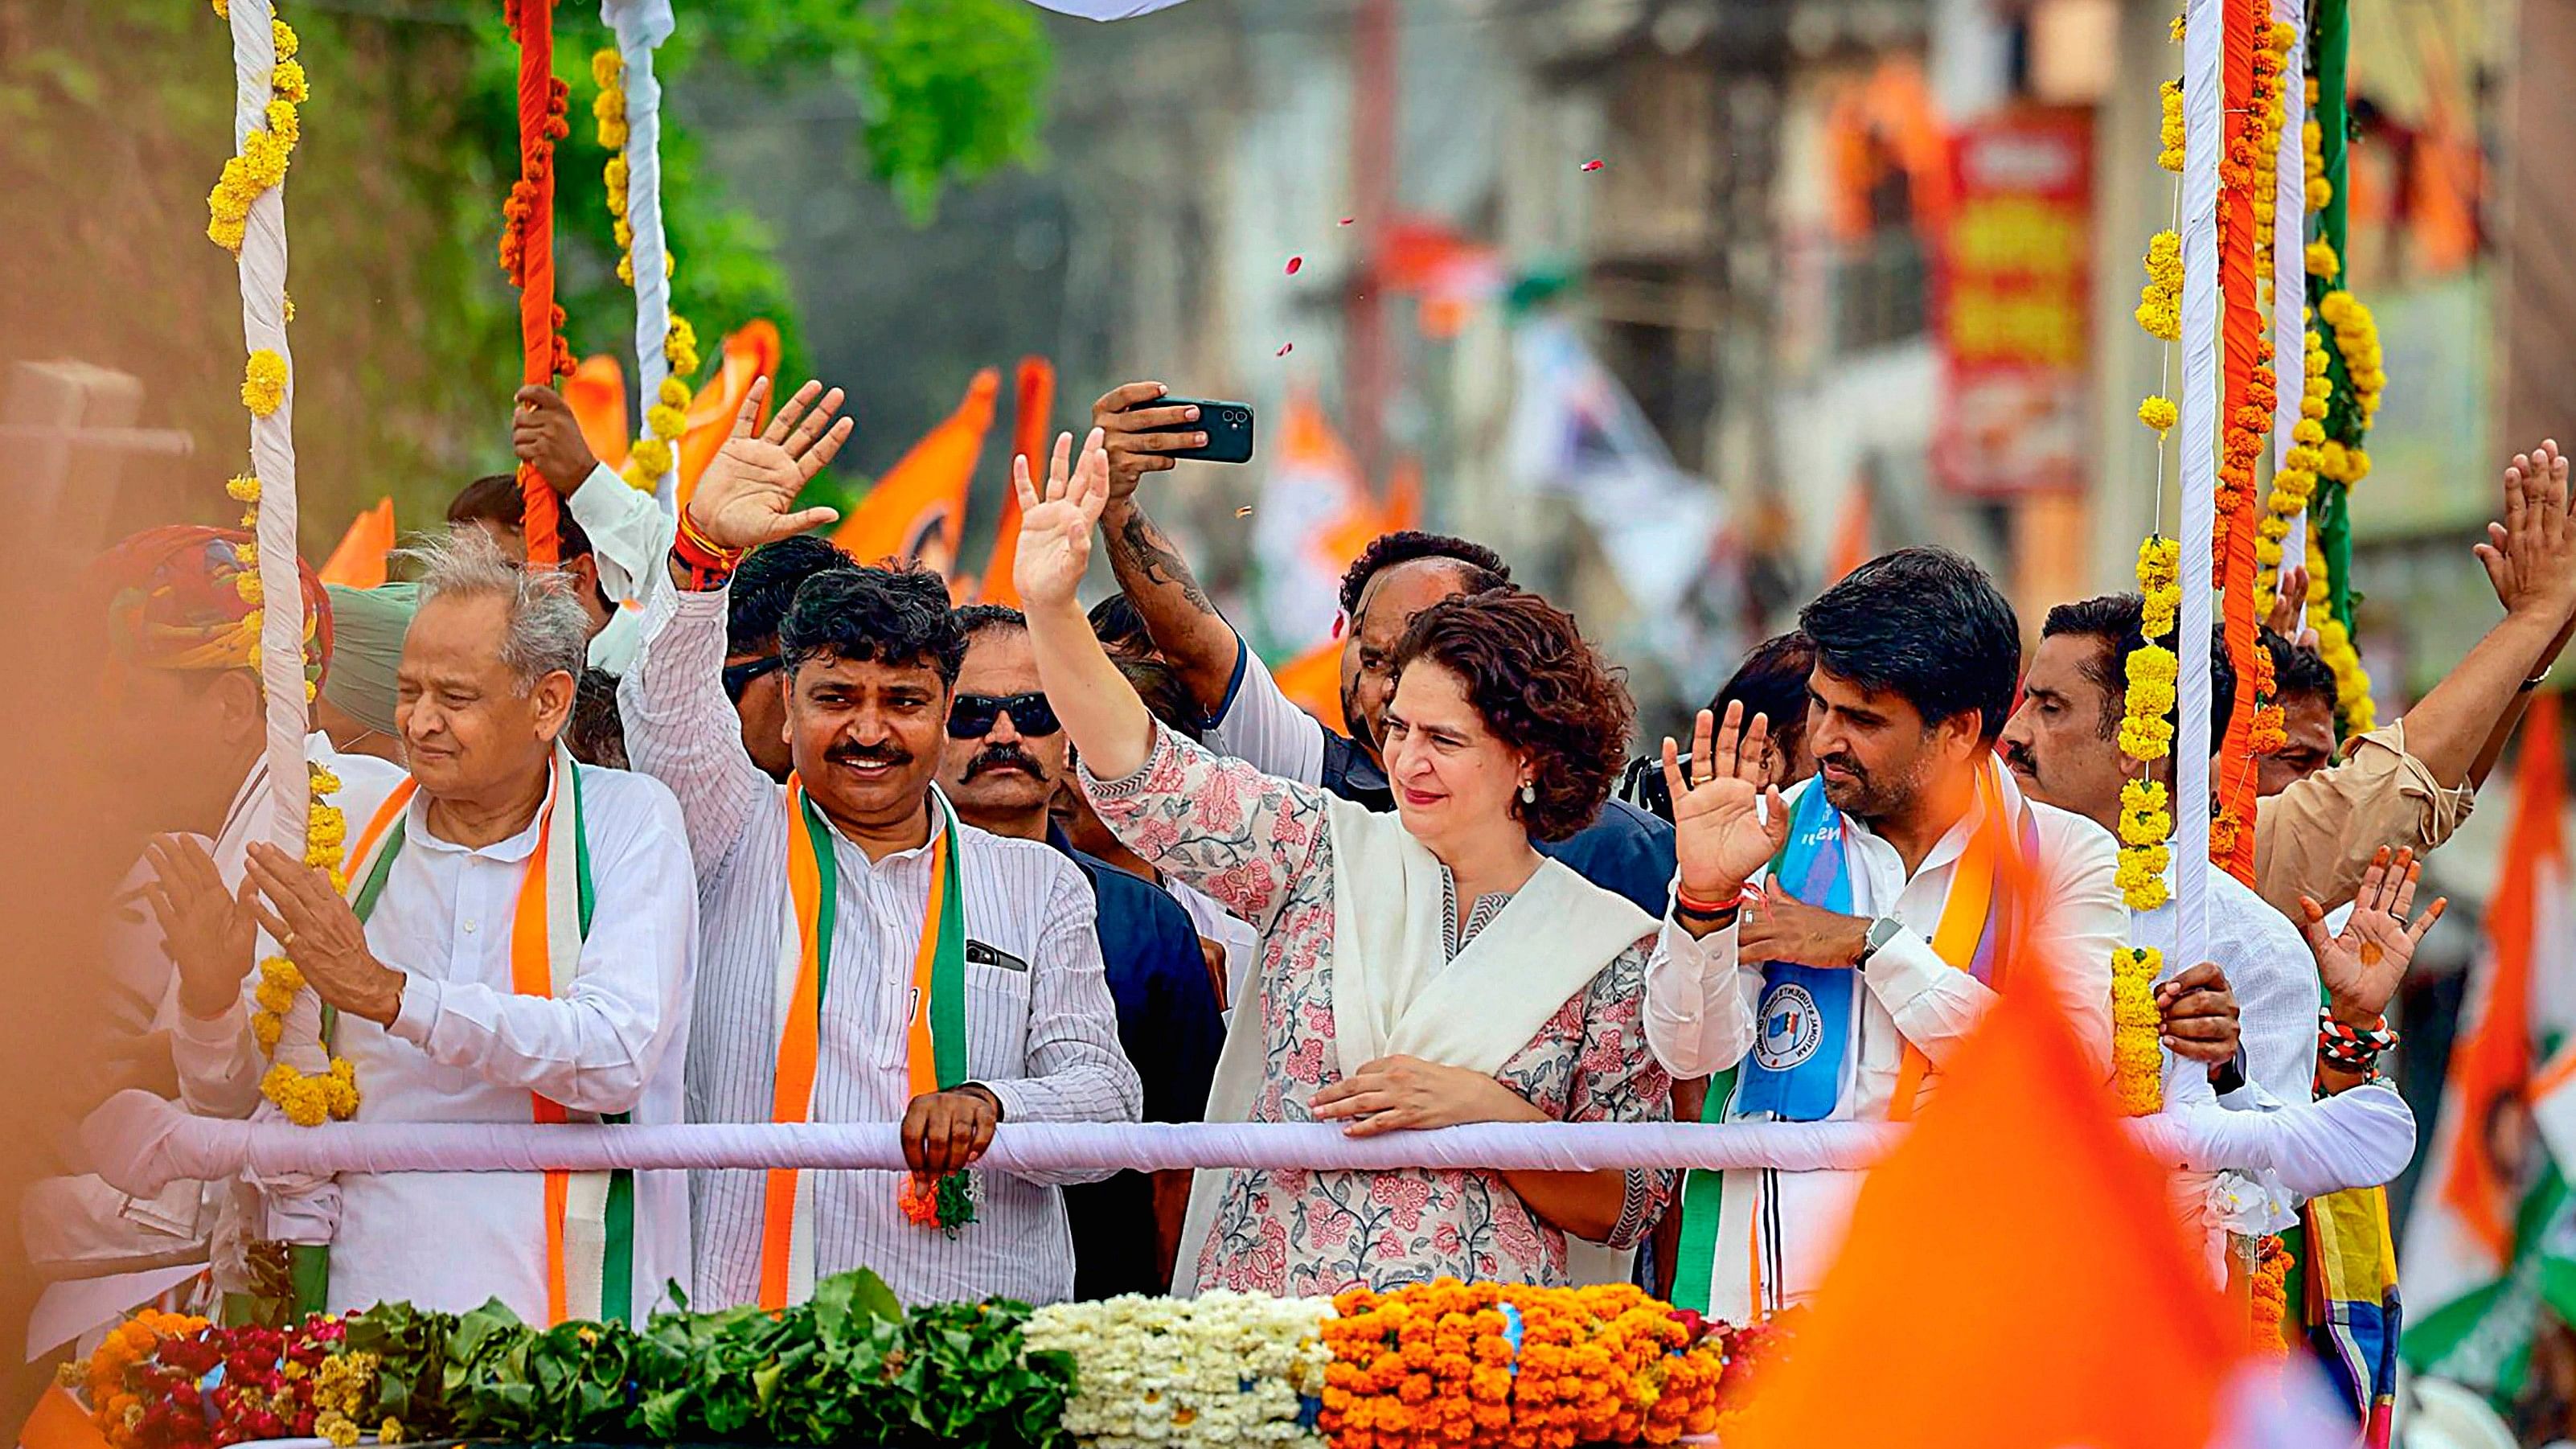 <div class="paragraphs"><p>Congress leaders Priyanka Gandhi Vadra and Ashok Gehlot wave at supporters at an election campaign rally in Alwar.</p></div>